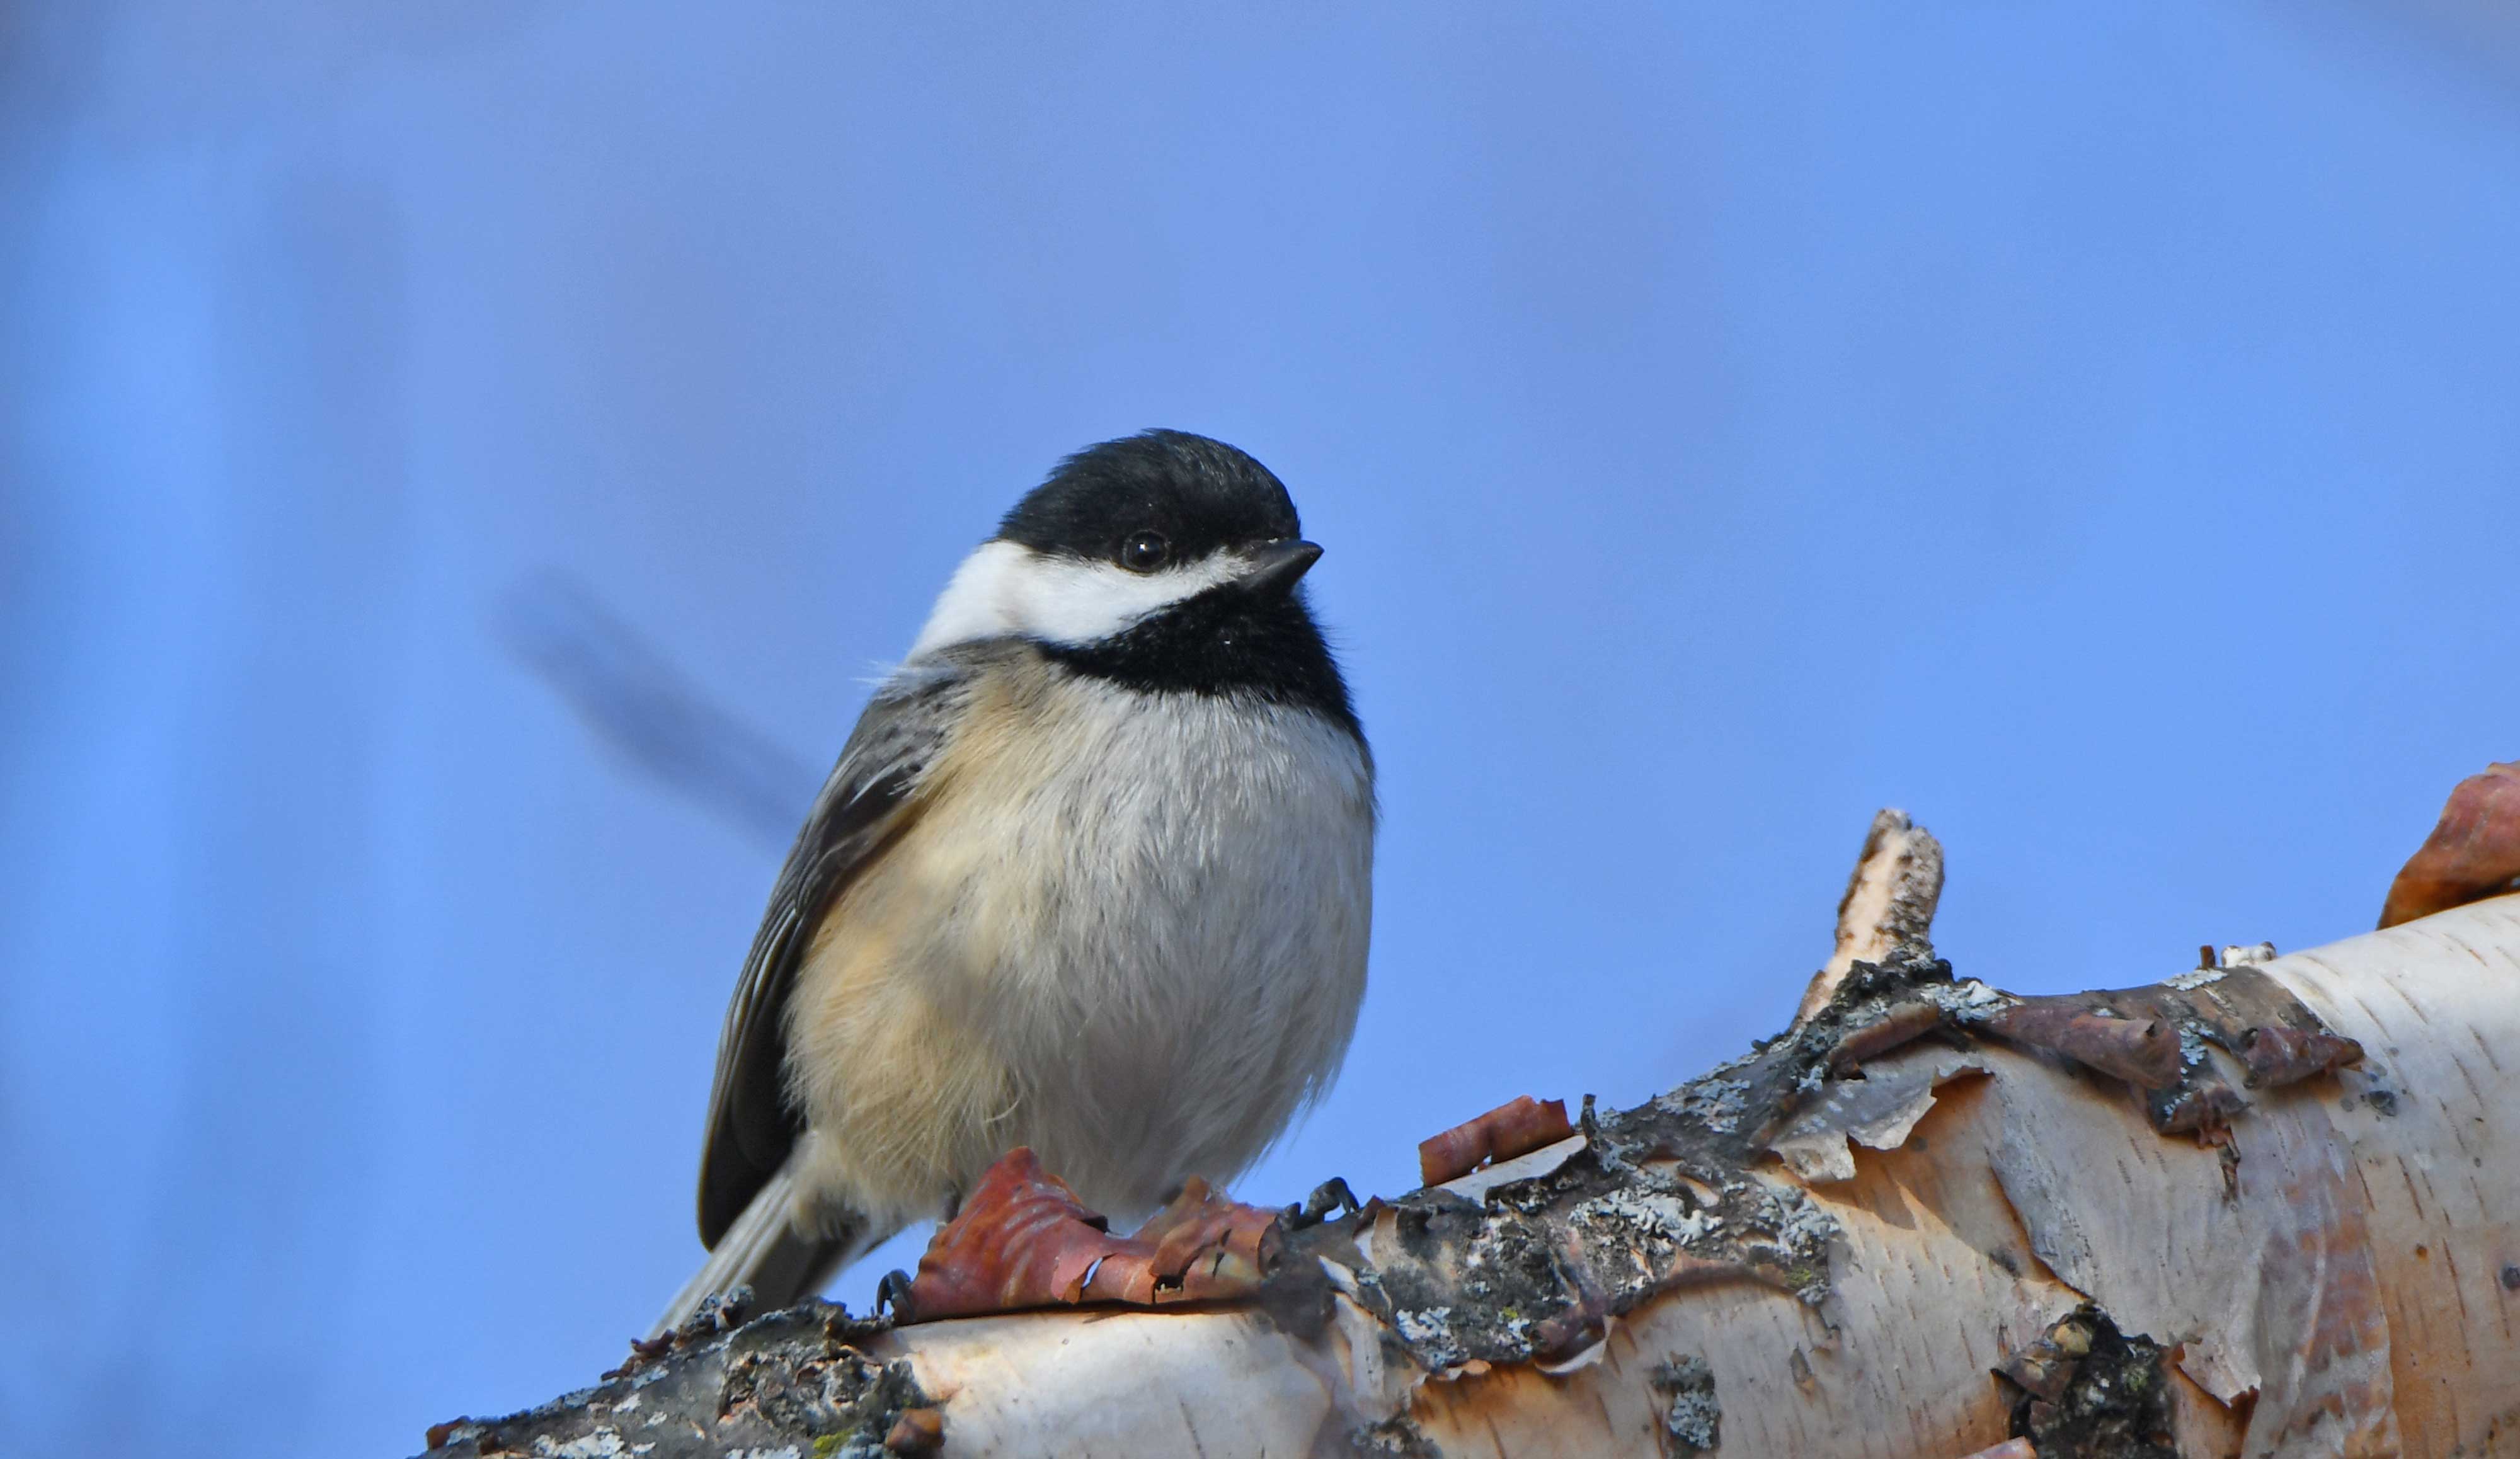 A black-capped chickadee on a branch.